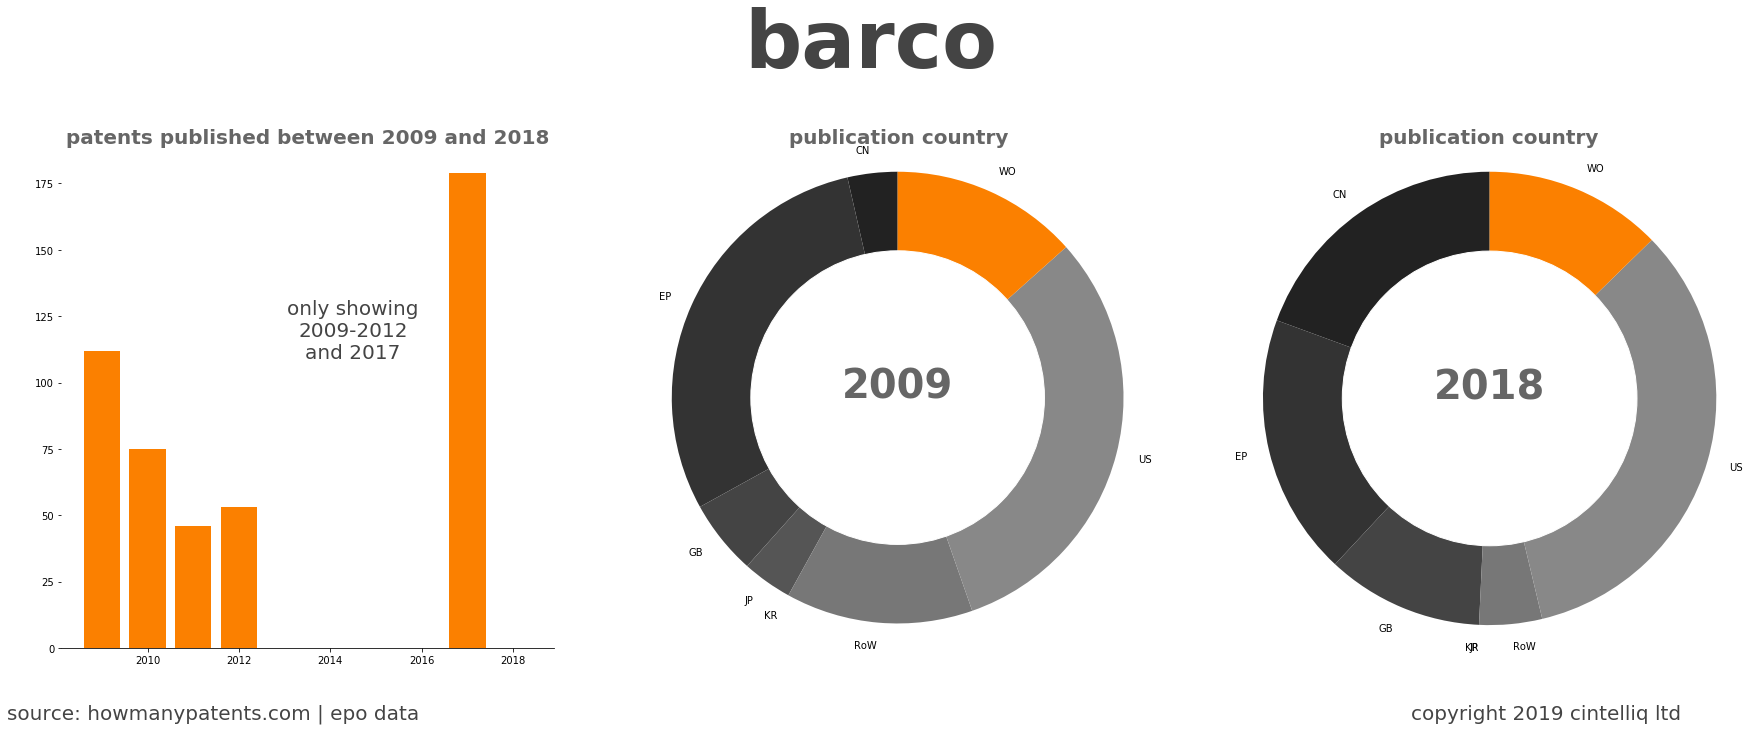 summary of patents for Barco